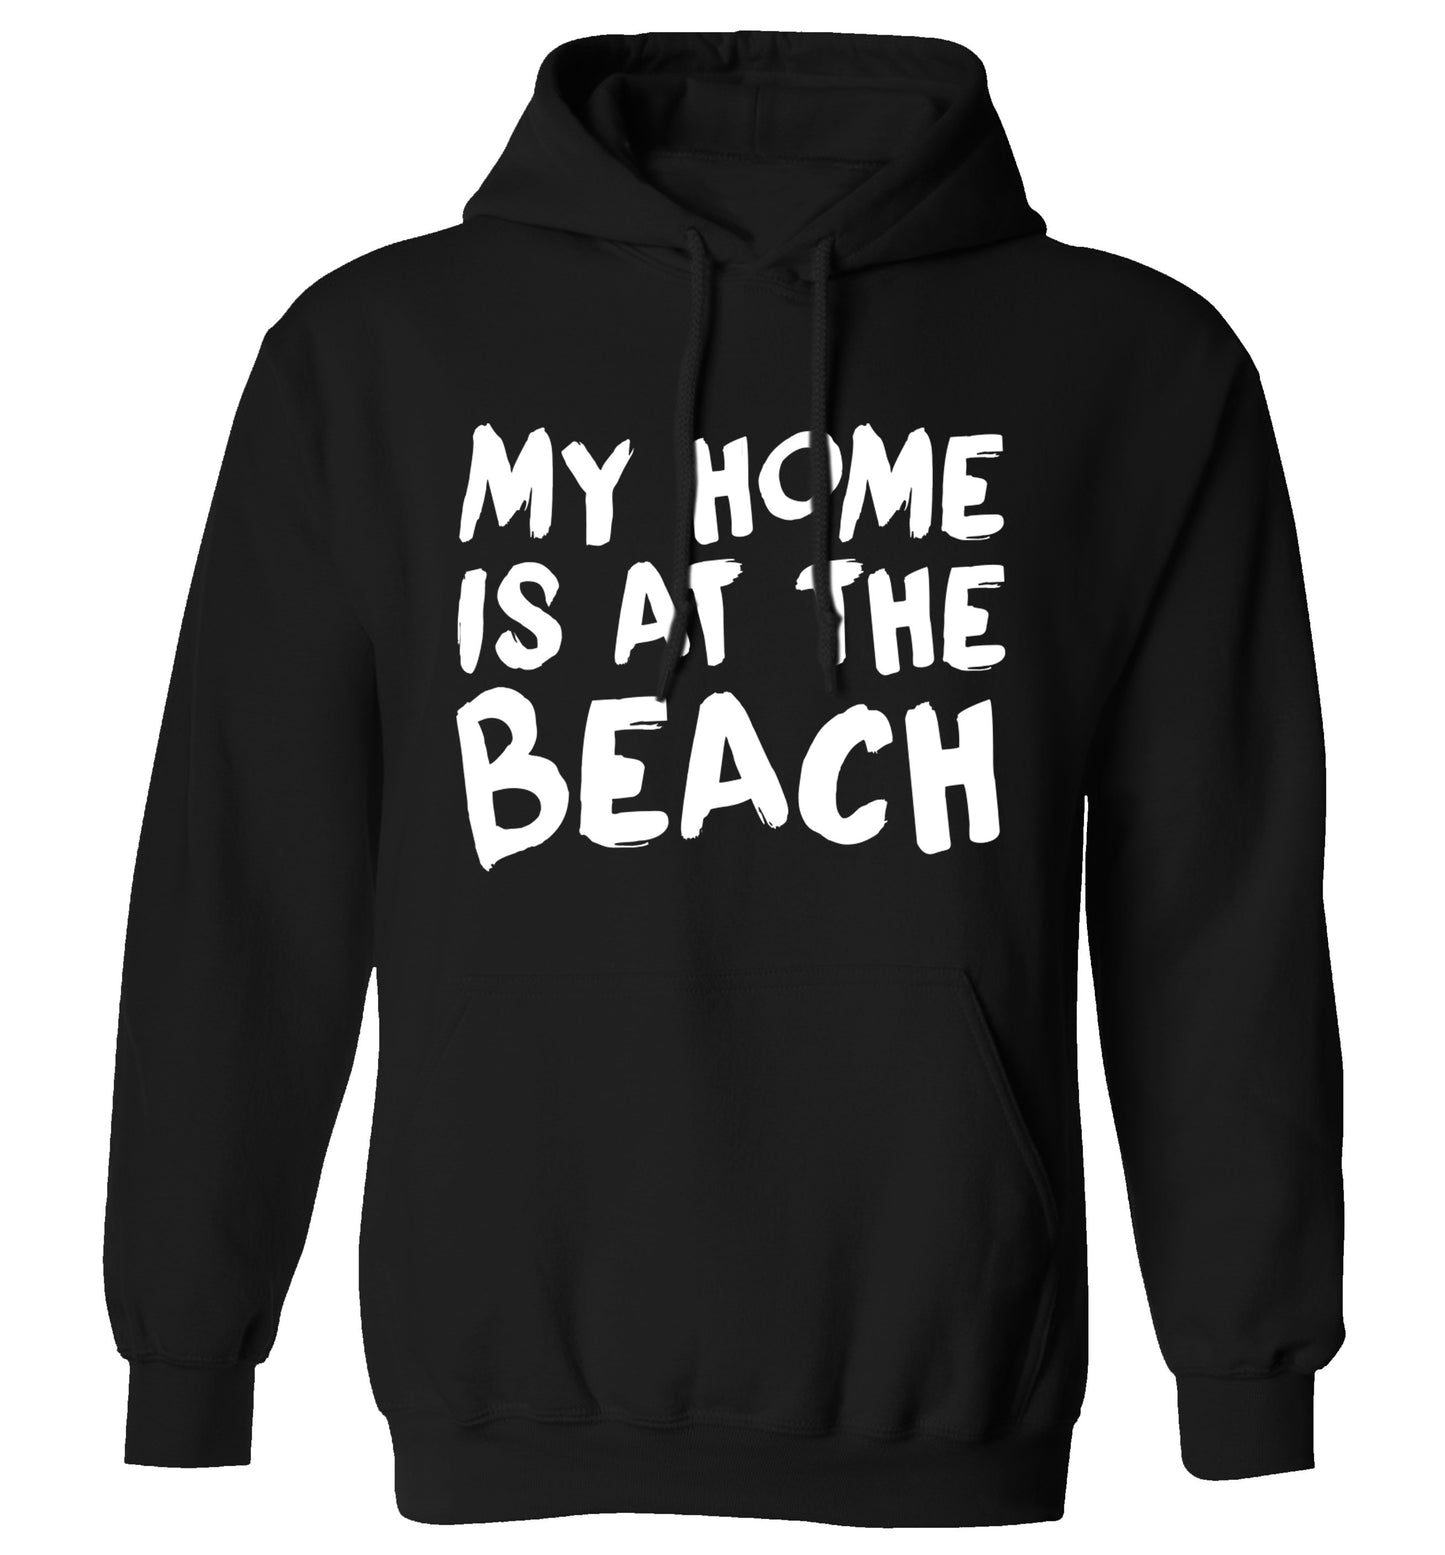 My home is at the beach adults unisex black hoodie 2XL